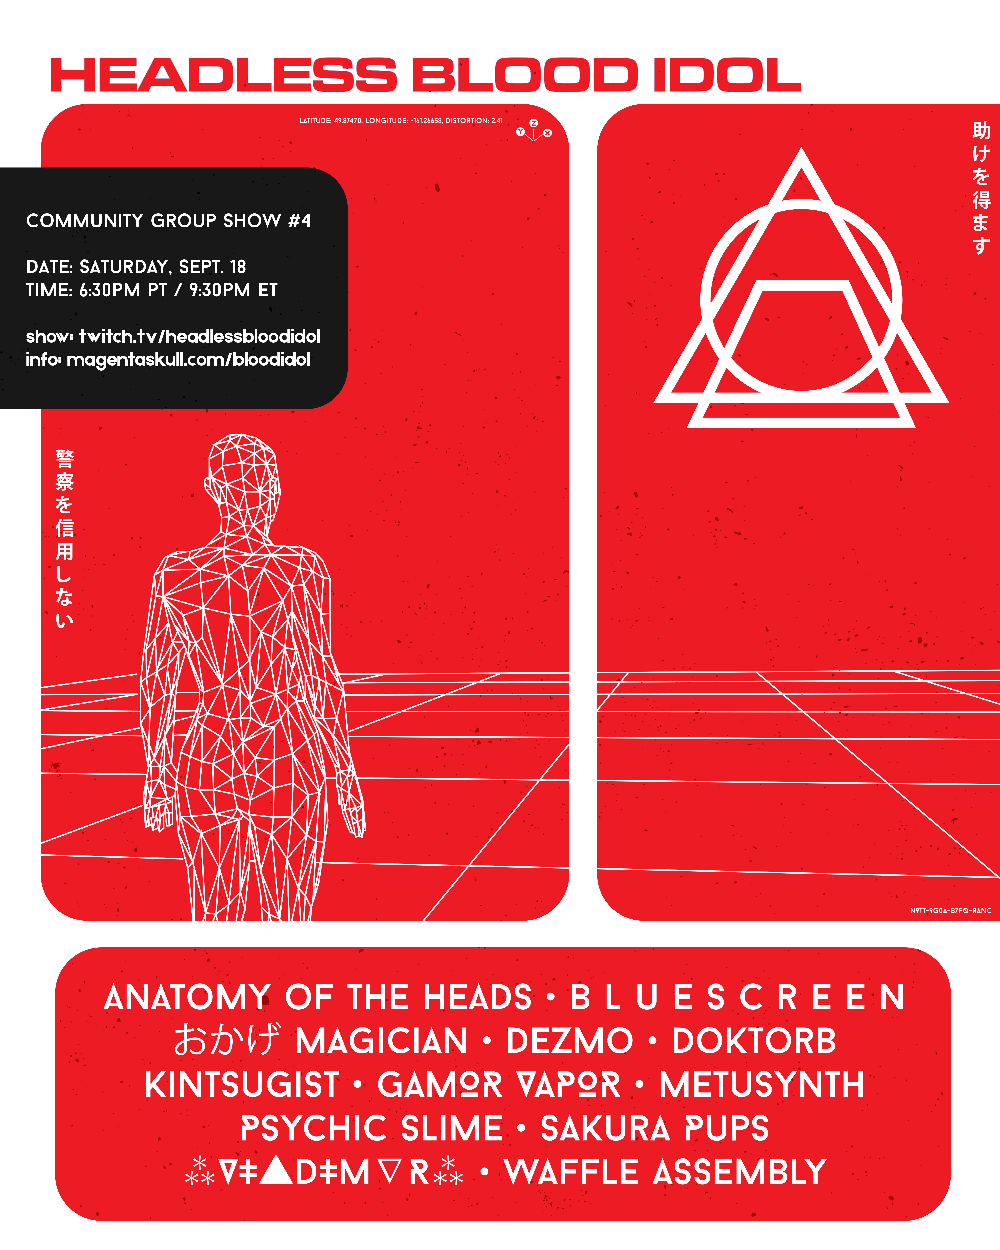 HEADLESS BLOOD IDOL GROUP SHOW 4 - FLYER BY MALARIA LABS